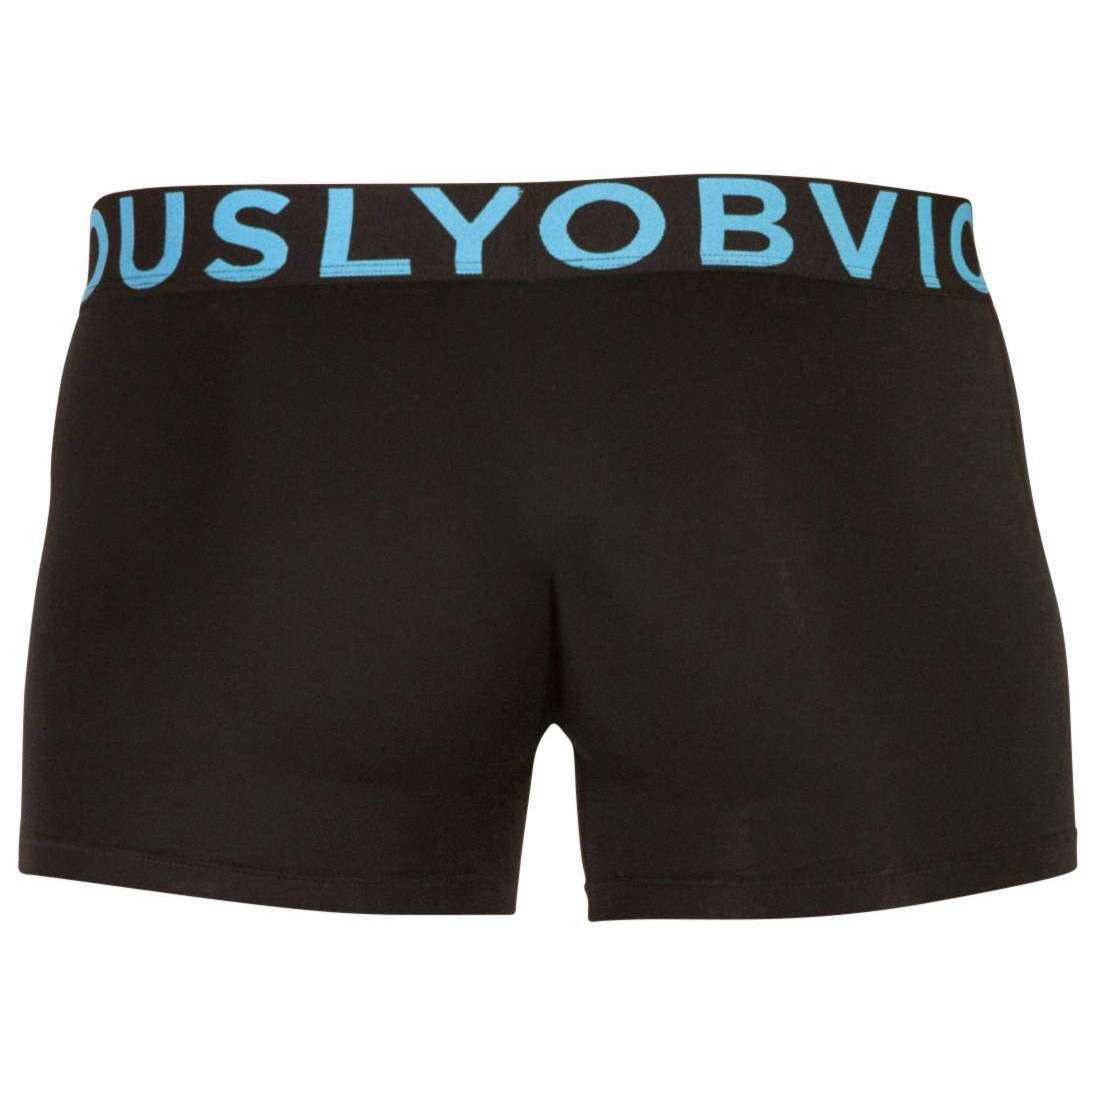 EveryMan AnatoMAX 3 Inch Boxer Brief by Obviously